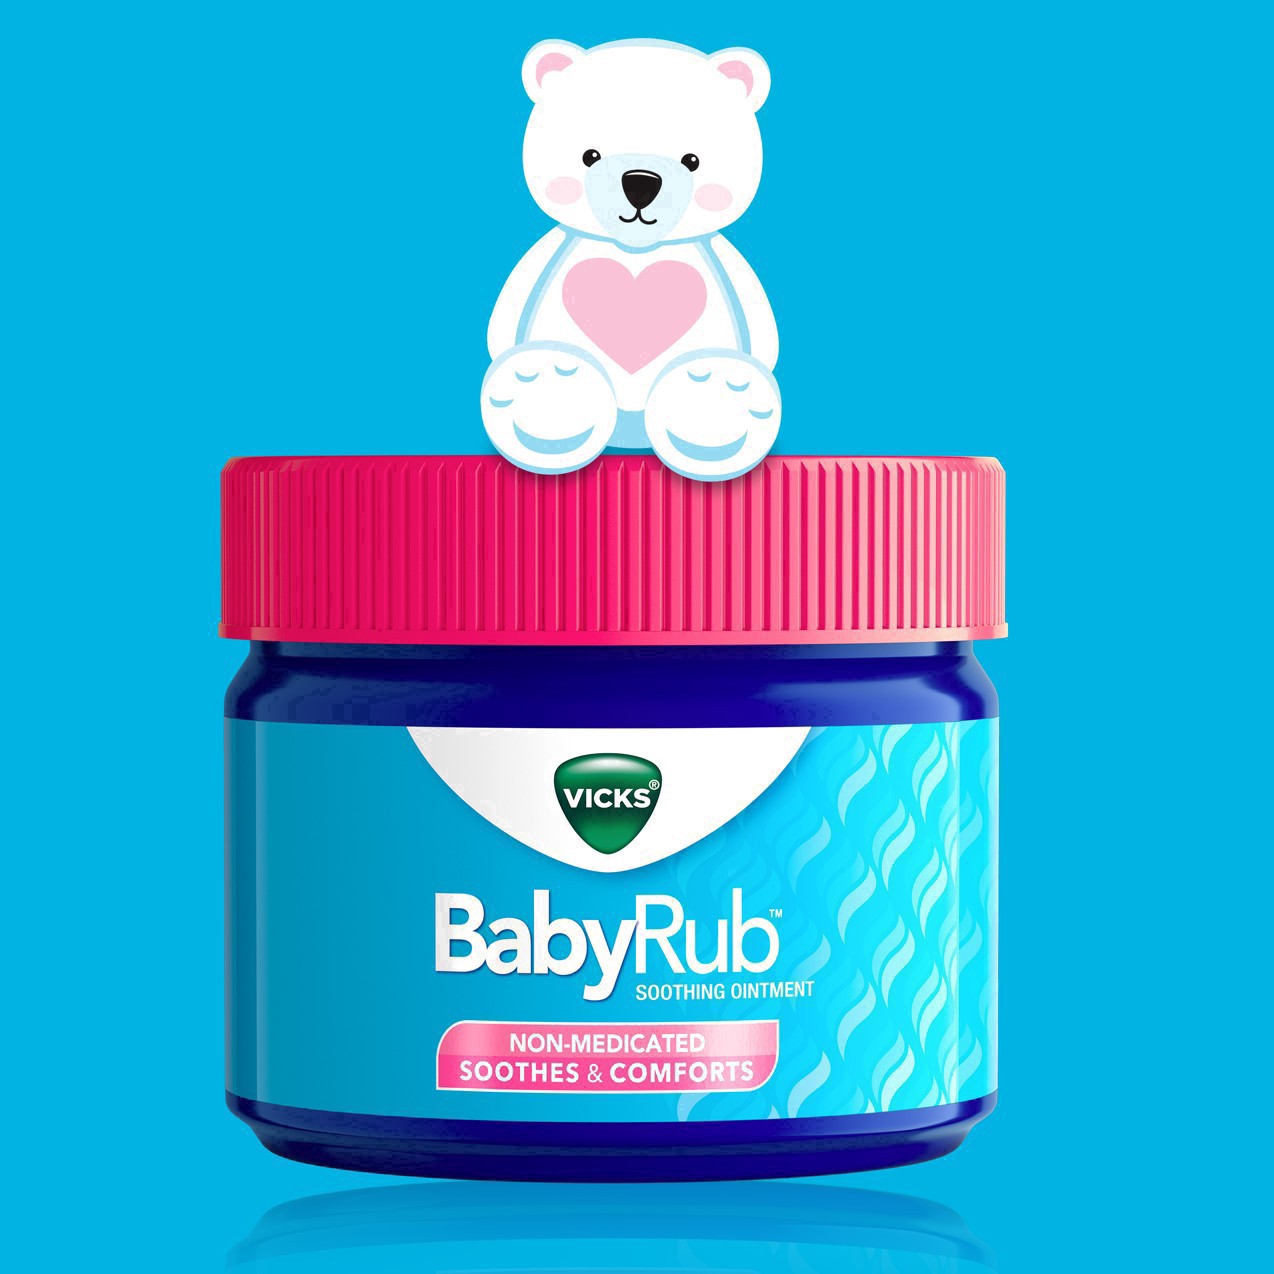 slide 53 of 78, Vicks BabyRub, Chest Rub Ointment with Soothing Aloe, Eucalyptus, Lavender, and Rosemary, from The Makers of VapoRub, 1.76 oz, 1.76 oz